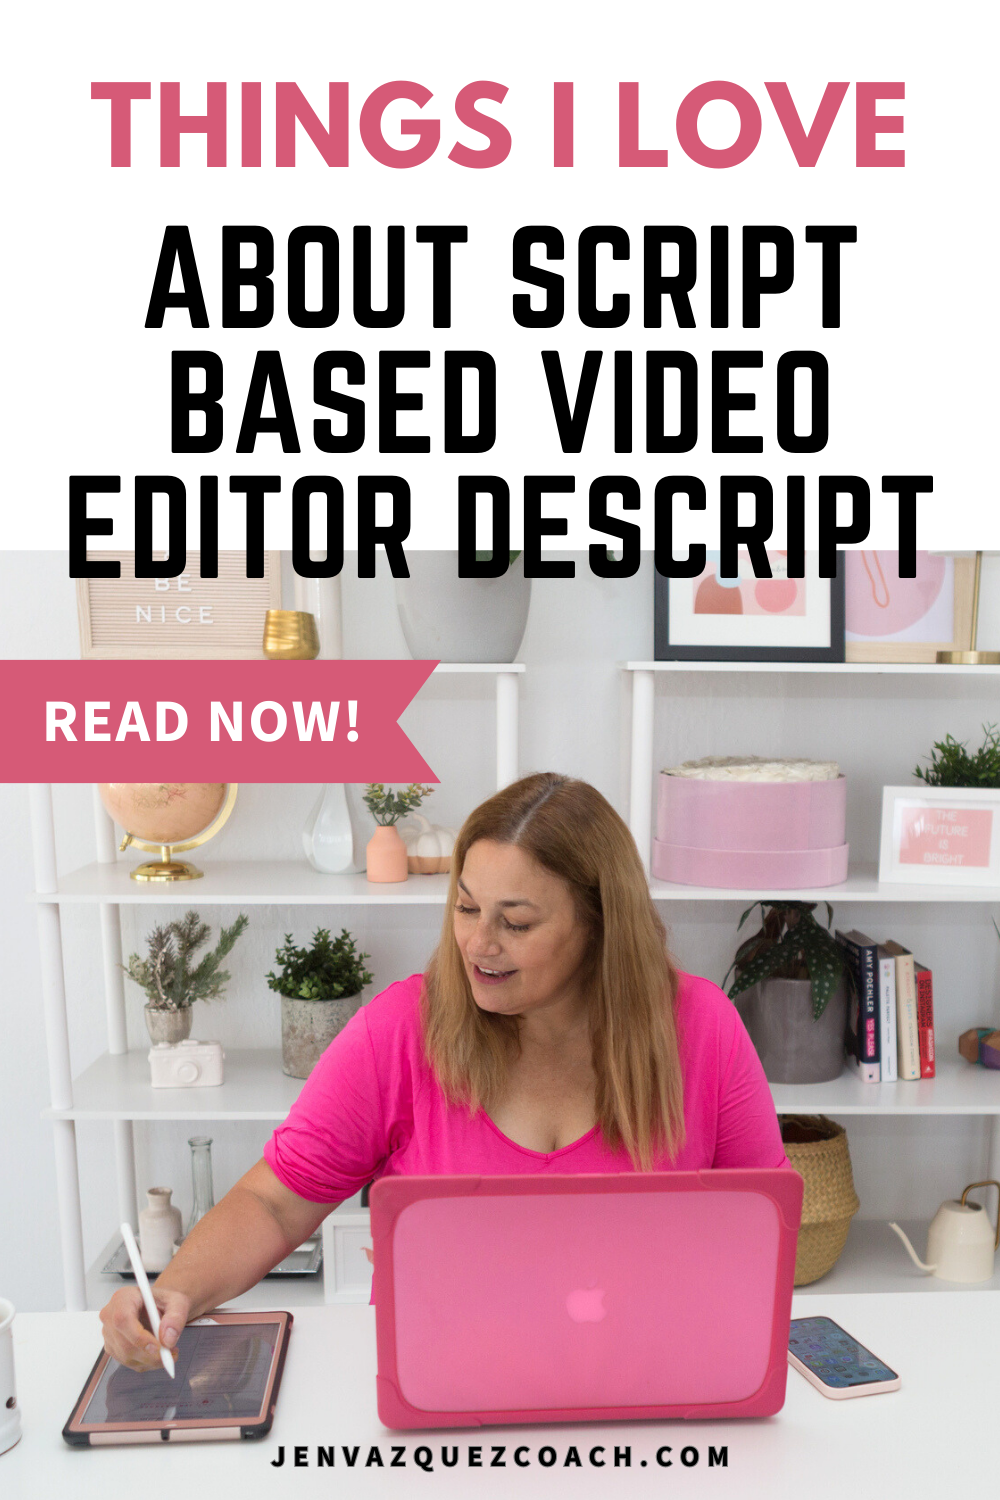 8 Things I Love about Descript (How I Saved 3.5 Hours) by Jen Vazquez Media